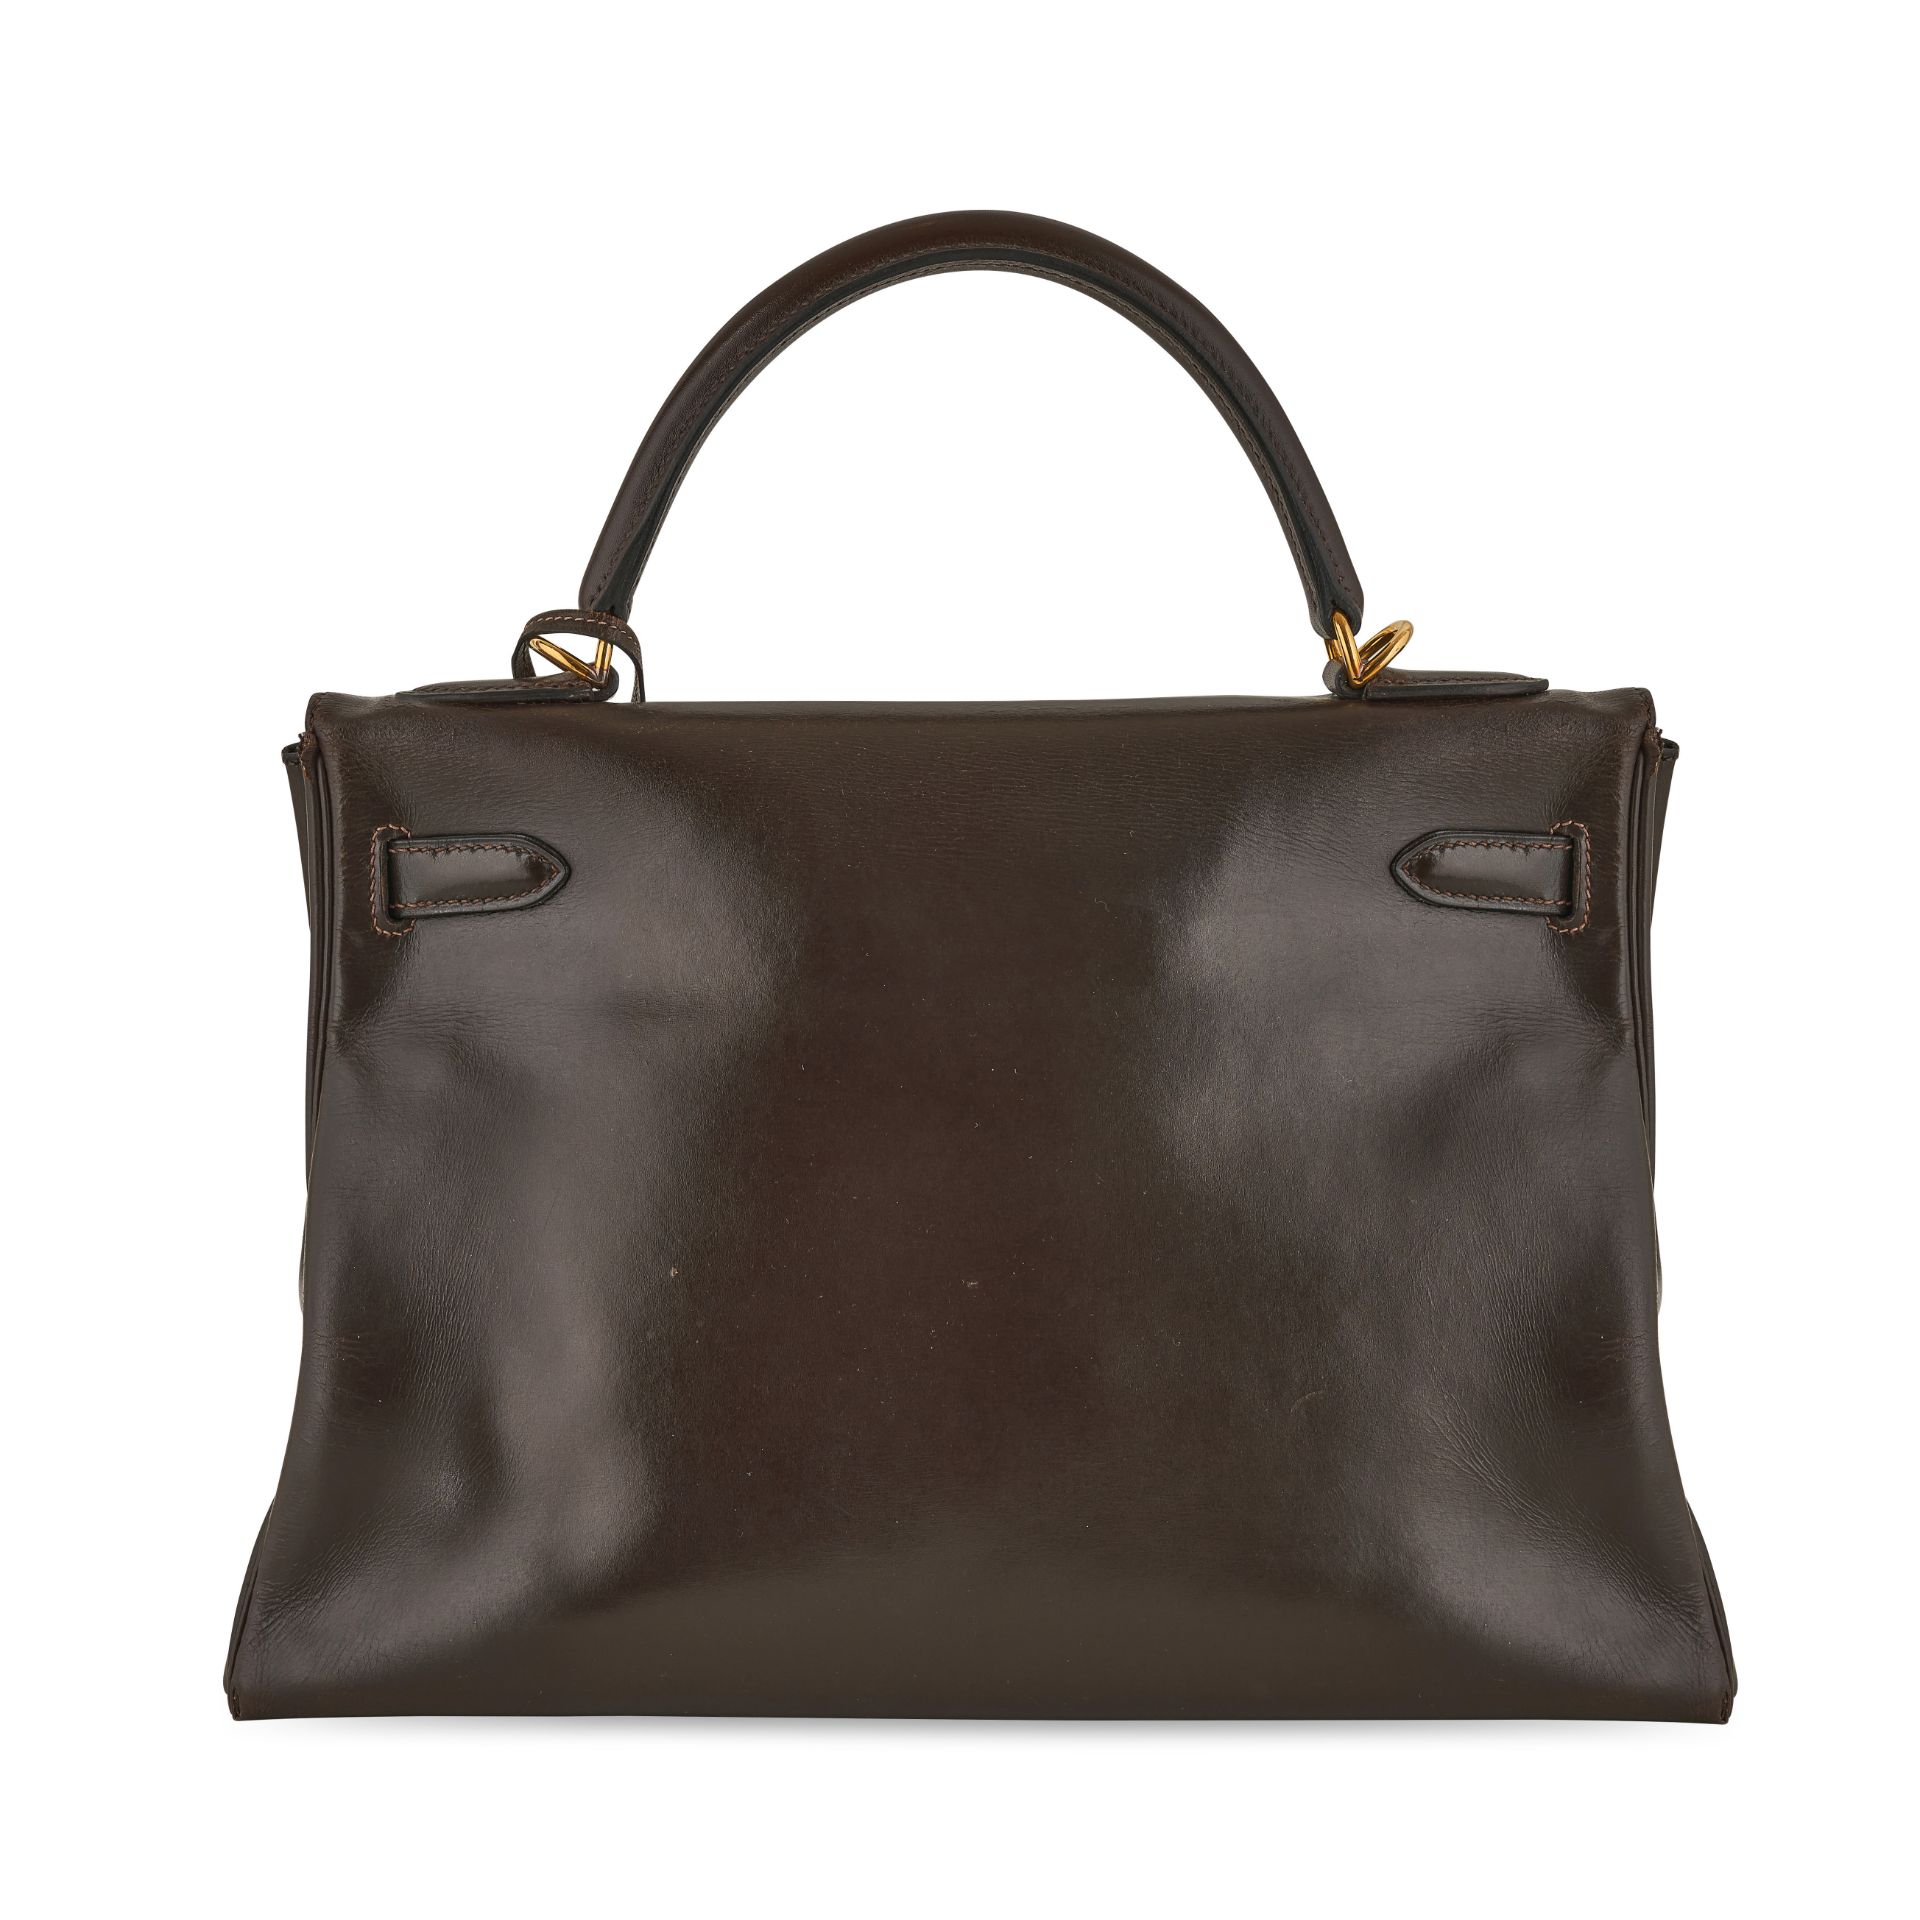 HERMES, A VINTAGE BROWN BOX KELLY 28 BAG (INCLUDES PADLOCK, KEYS AND CLOCHETTE) - Image 3 of 7